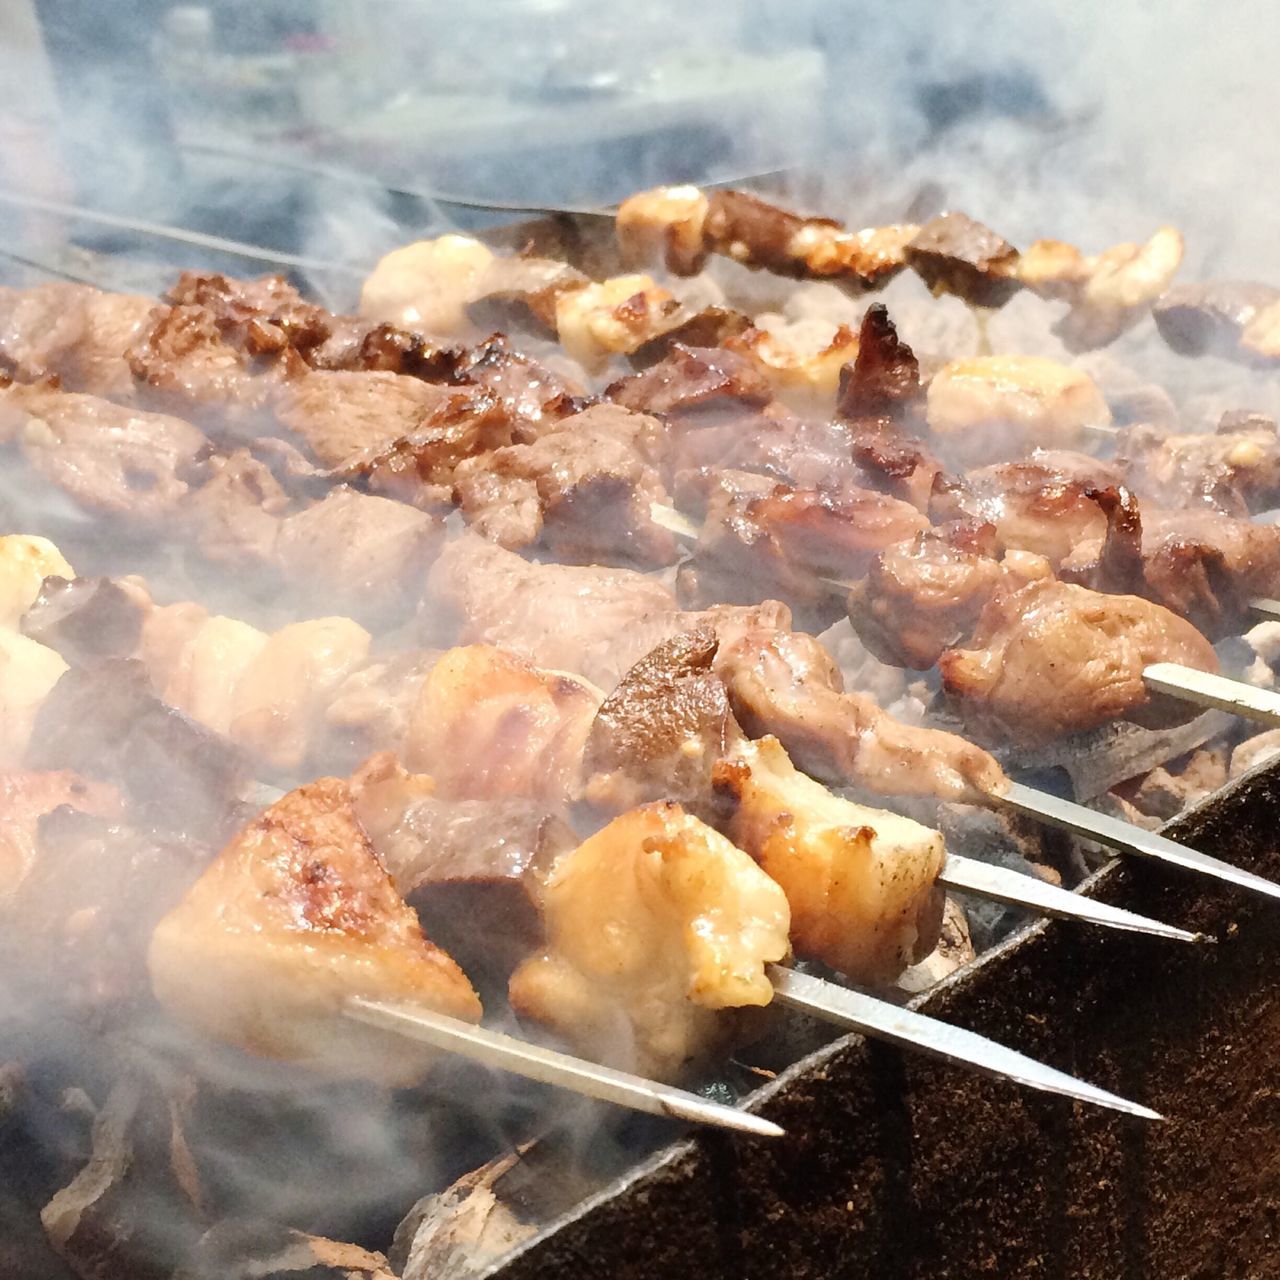 food and drink, food, heat - temperature, preparation, freshness, cooking, barbecue grill, smoke - physical structure, meat, barbecue, flame, burning, healthy eating, grilled, fire - natural phenomenon, close-up, preparing food, heat, high angle view, roasted